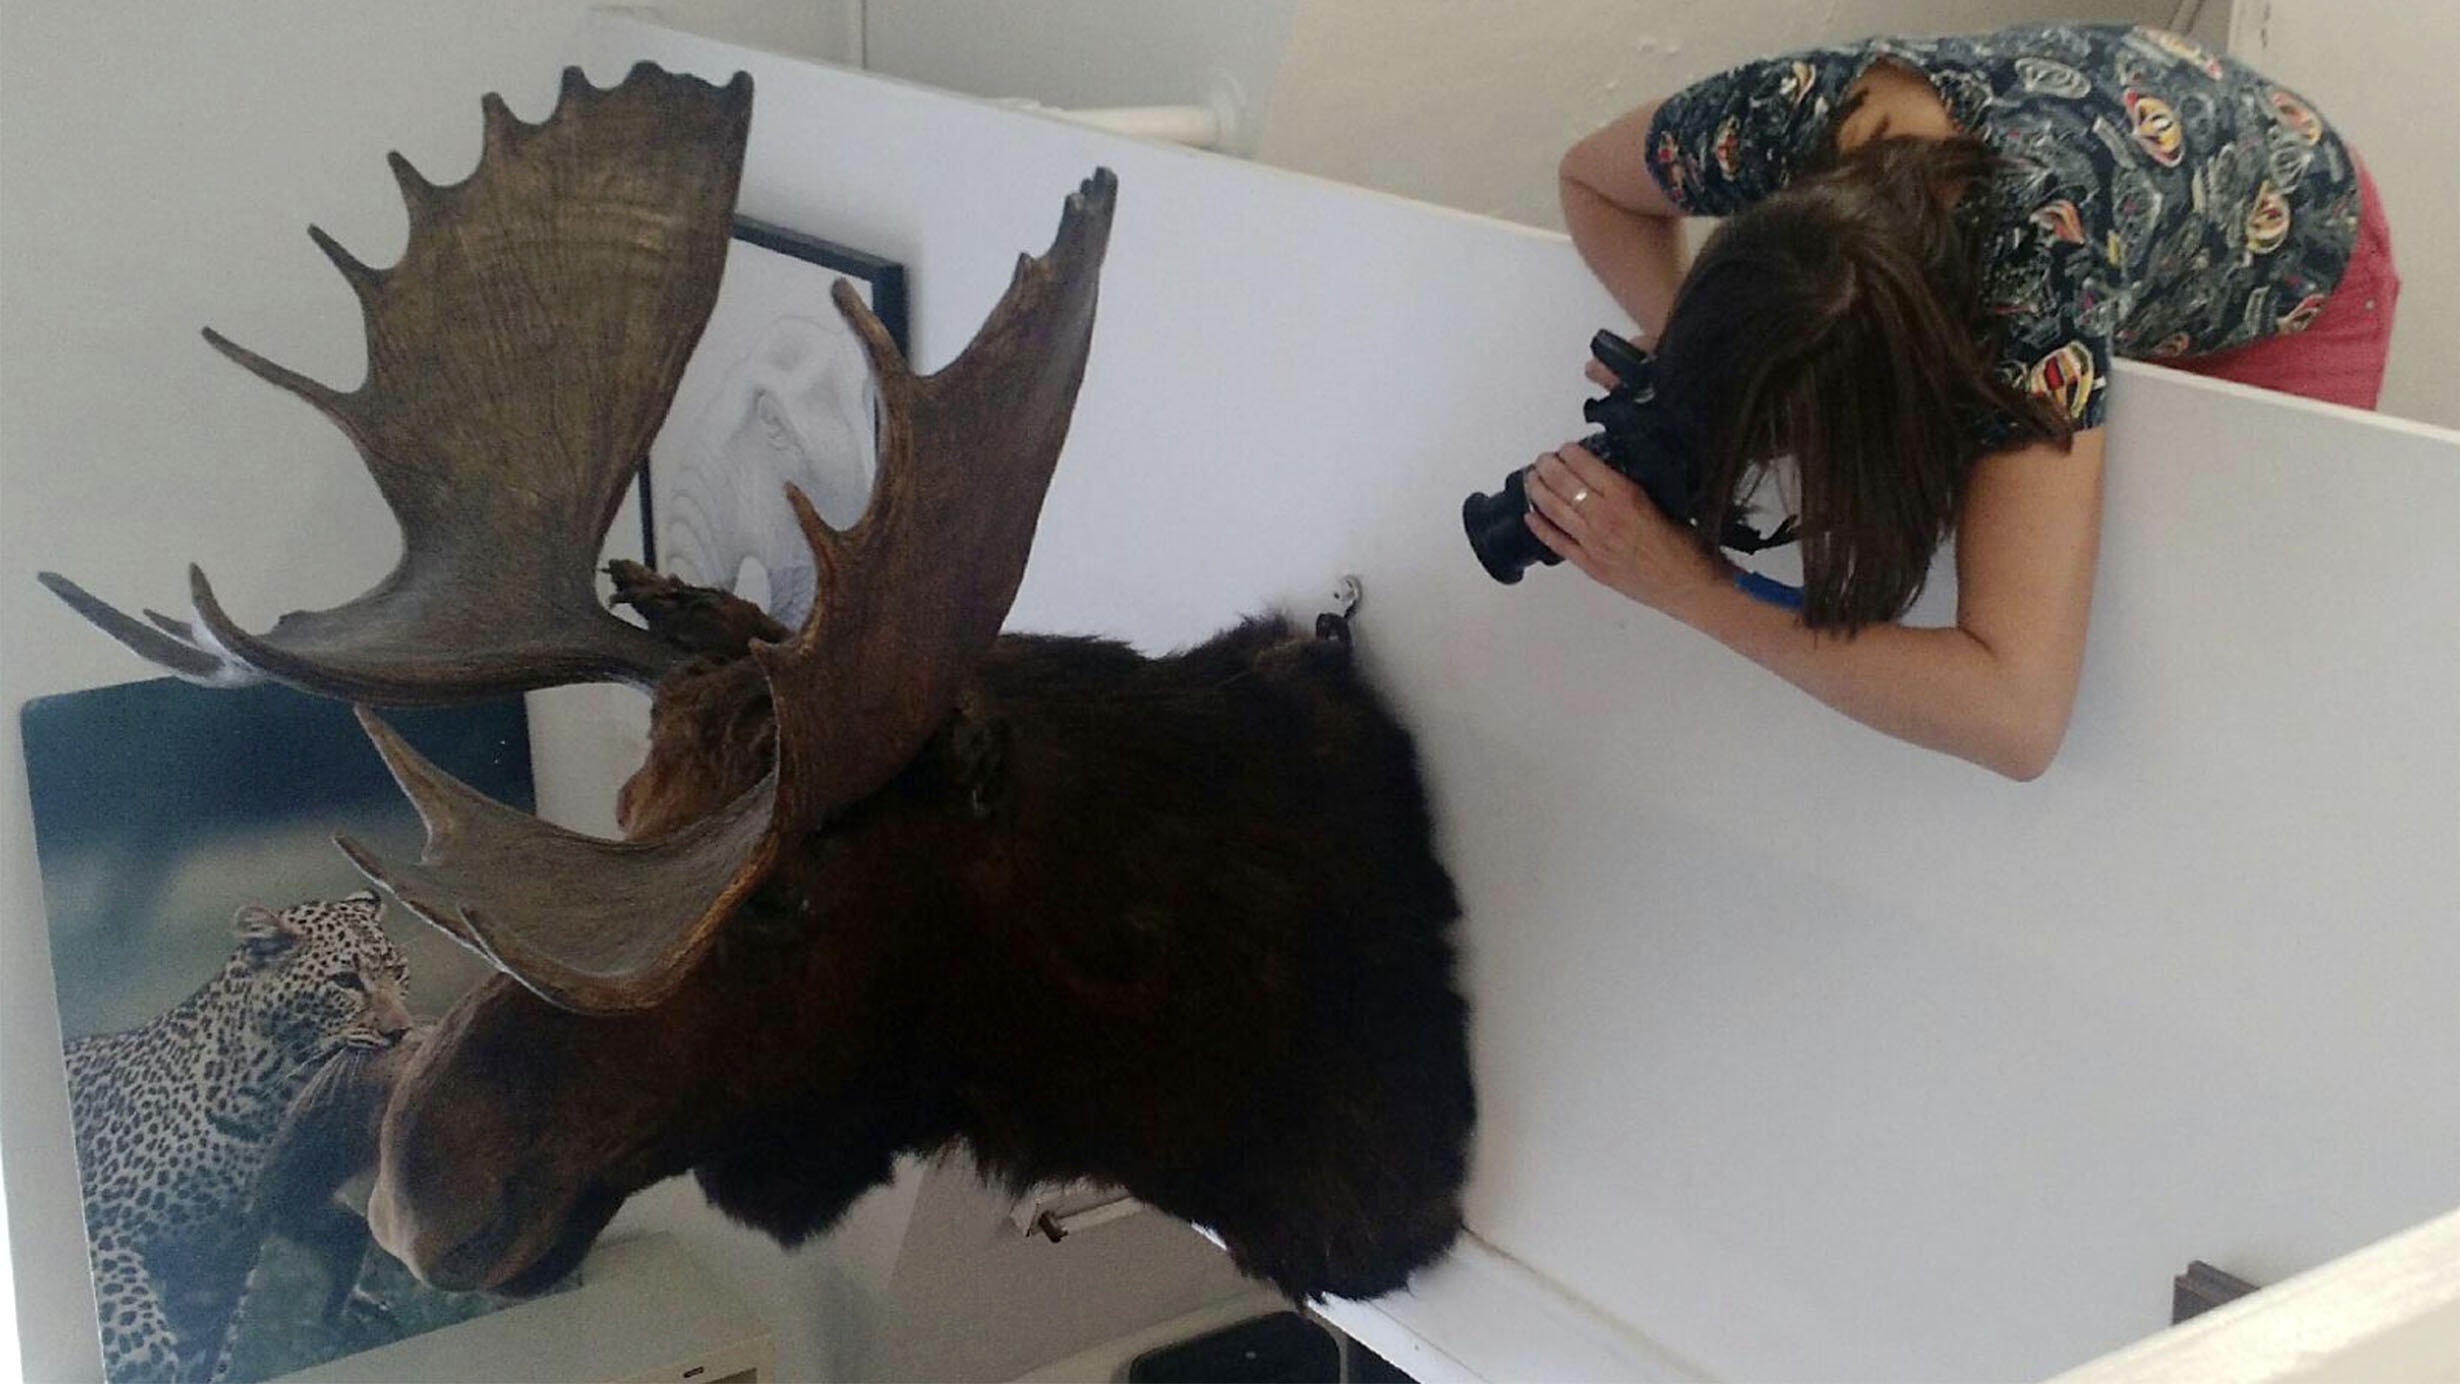 Scientist leans over a balcony wall to photograph the top of a mounted antlered mammal specimen.